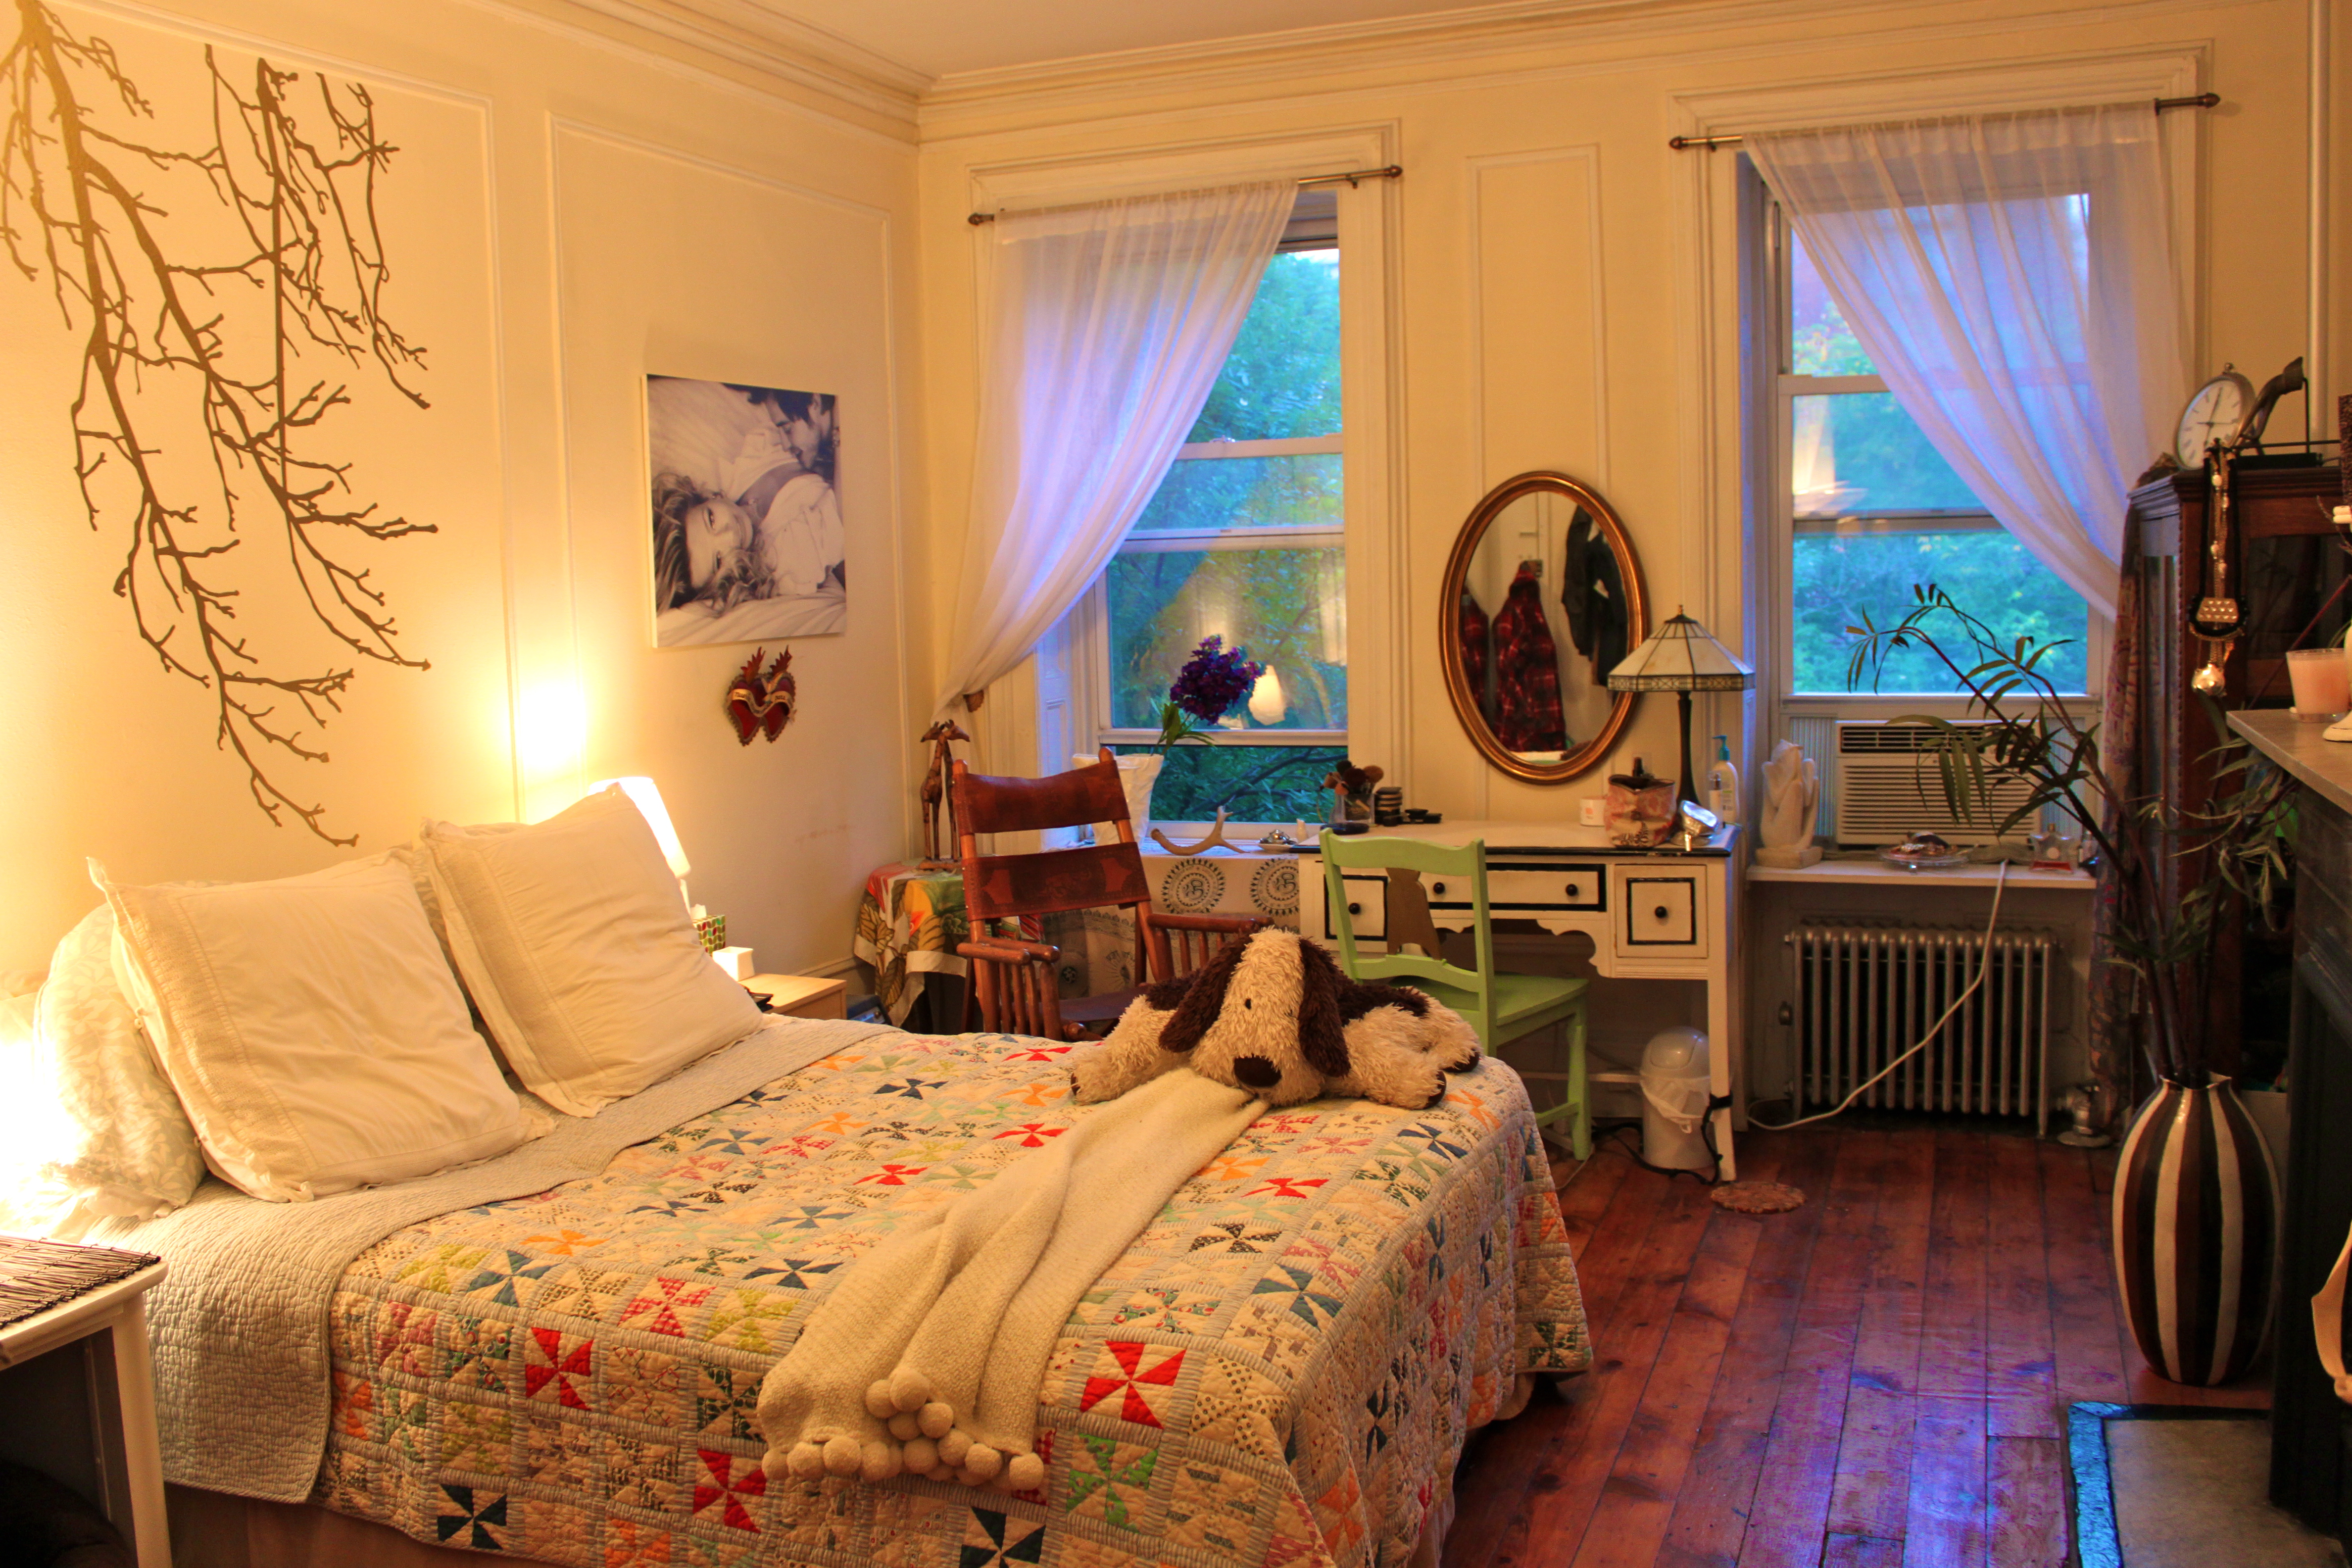 ... apartment pictured above has a fairly roomy bedroom by nyc standards